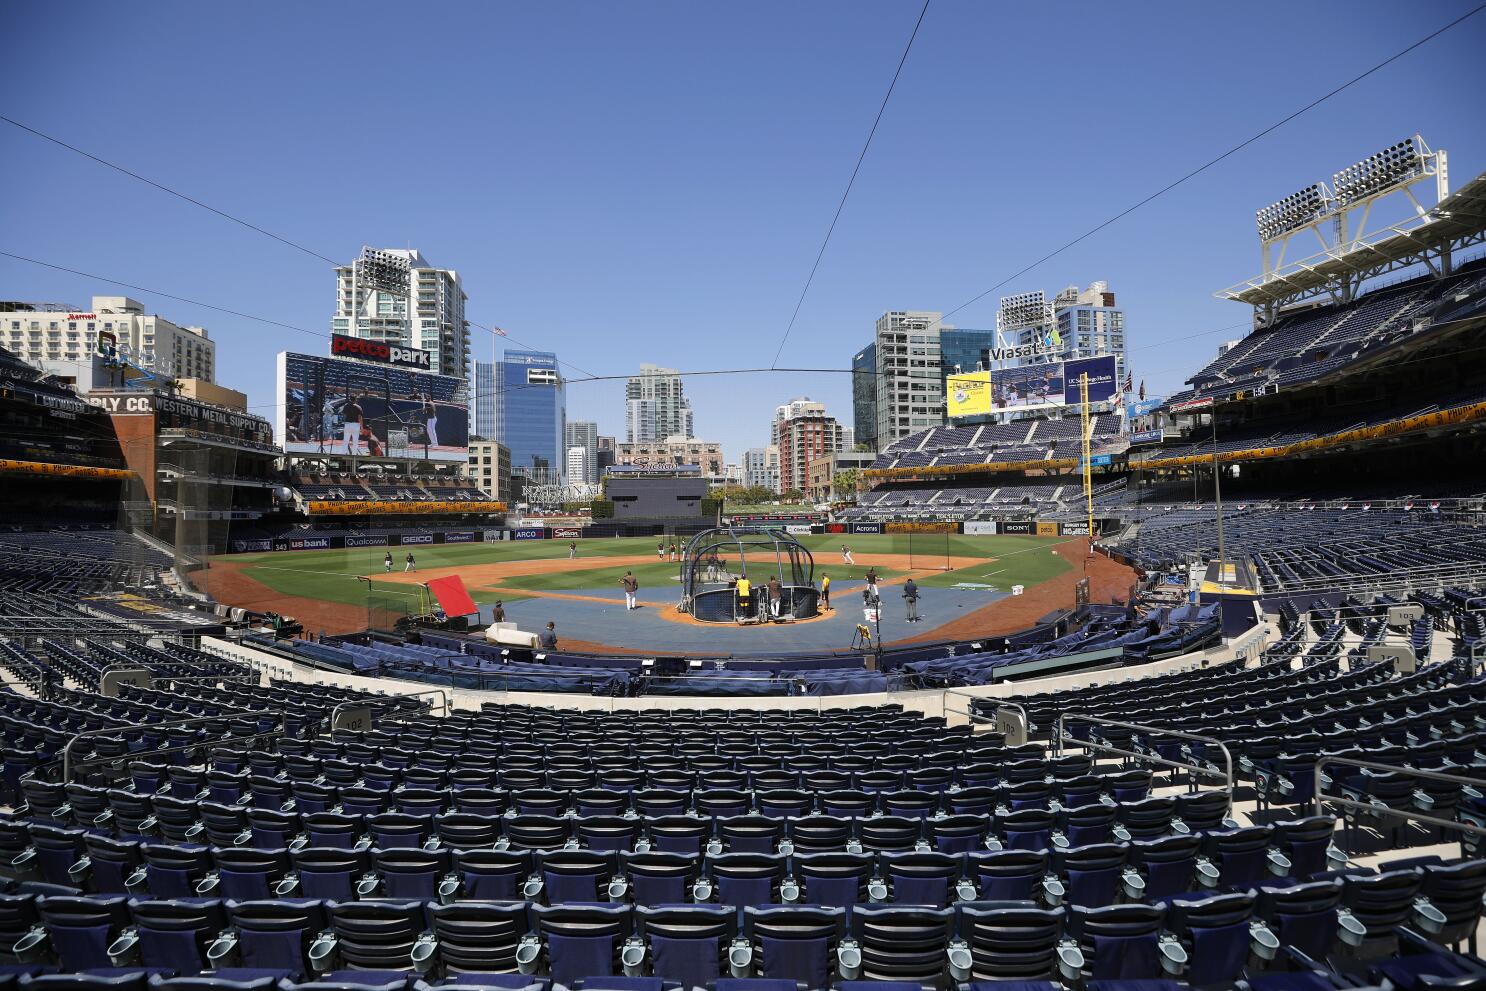 At Petco Park, Watch A Baseball Game Like Never Before